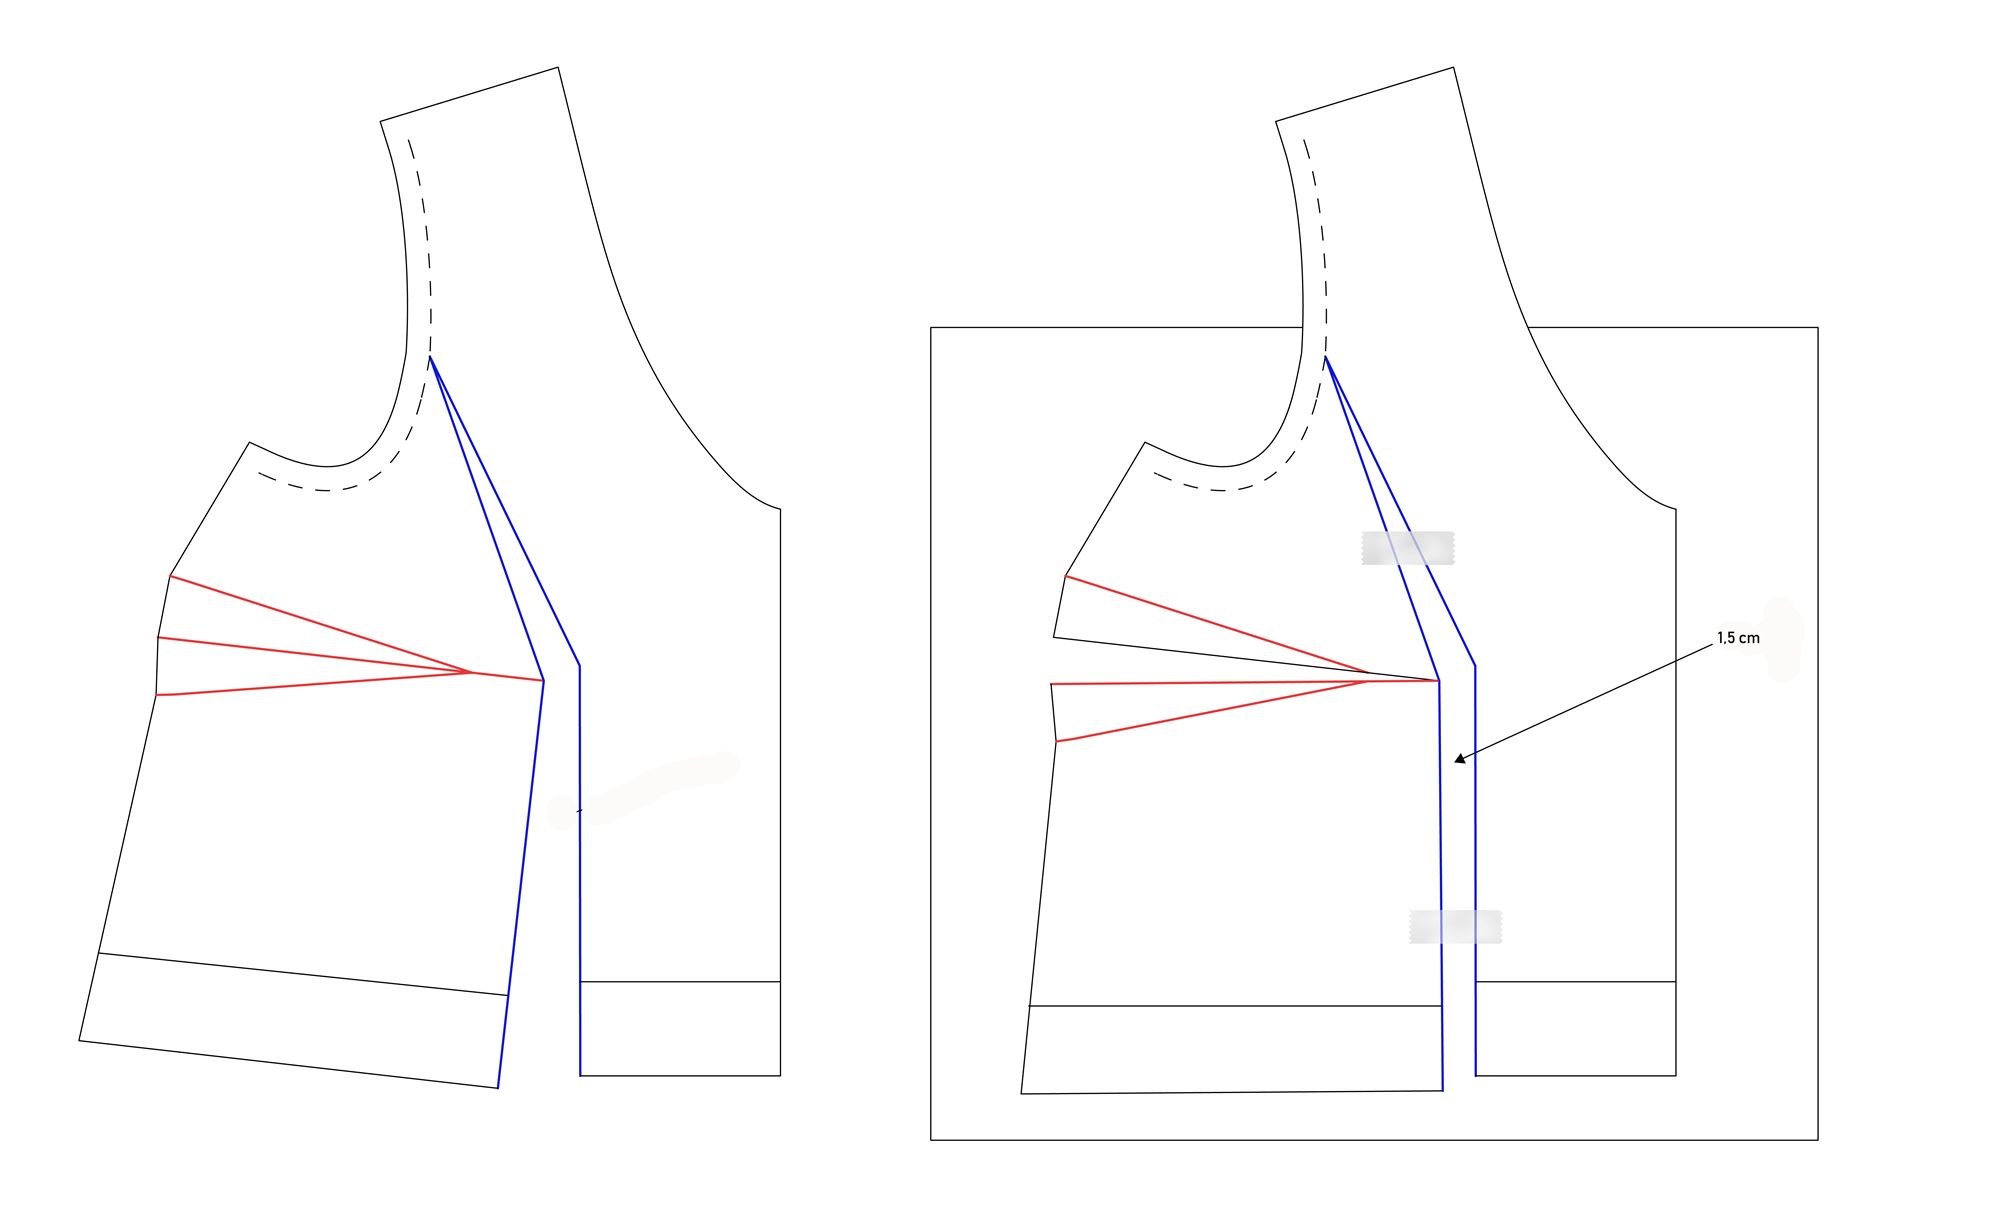 fitting and pattern corrections for small bust adjustment on a